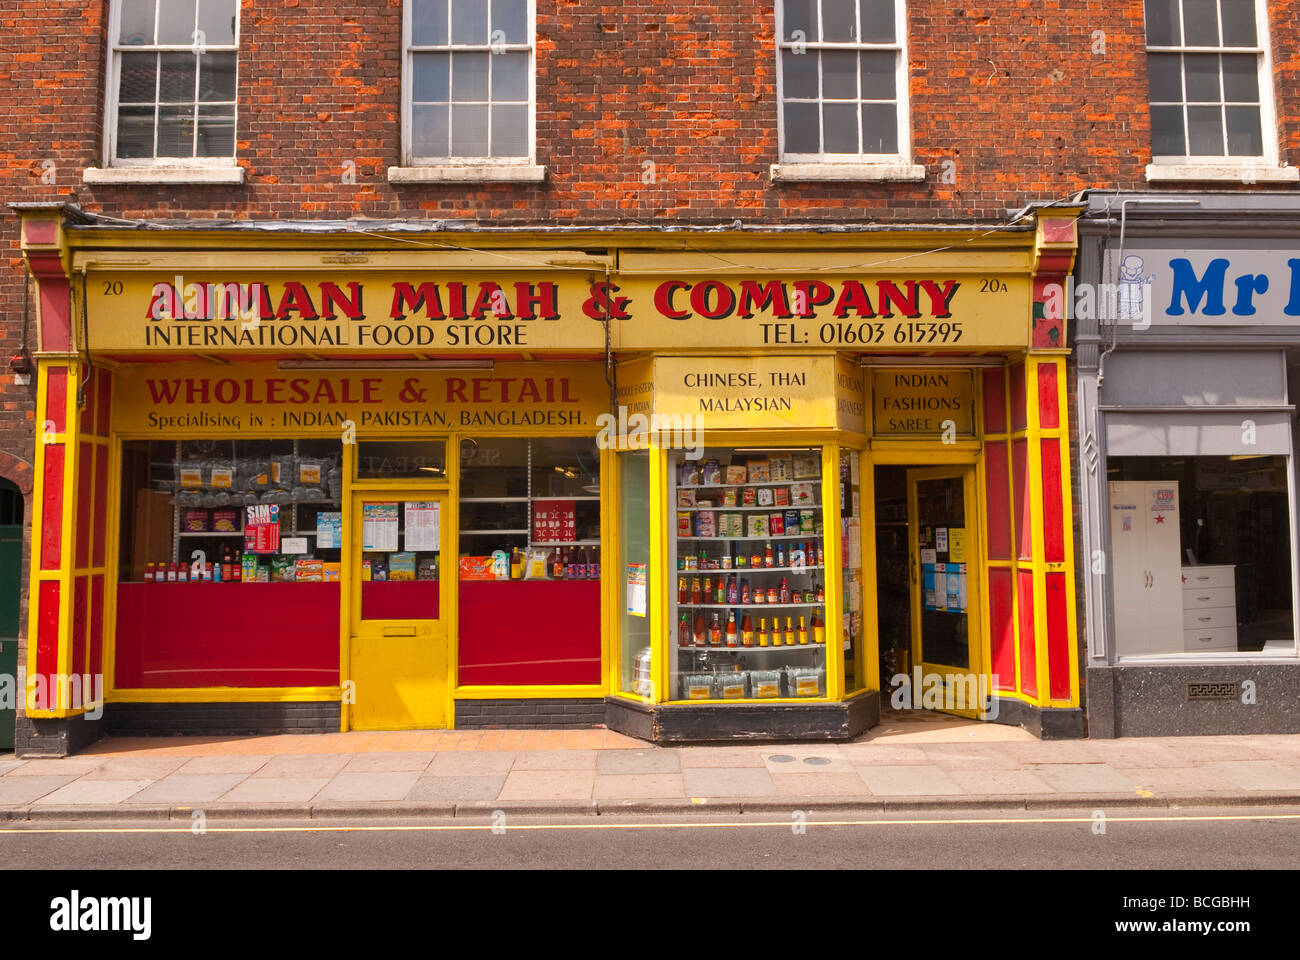 Ajman Miah and company international food shop store in Norwich Norfolk Uk specialising in foreign foods Stock Photo